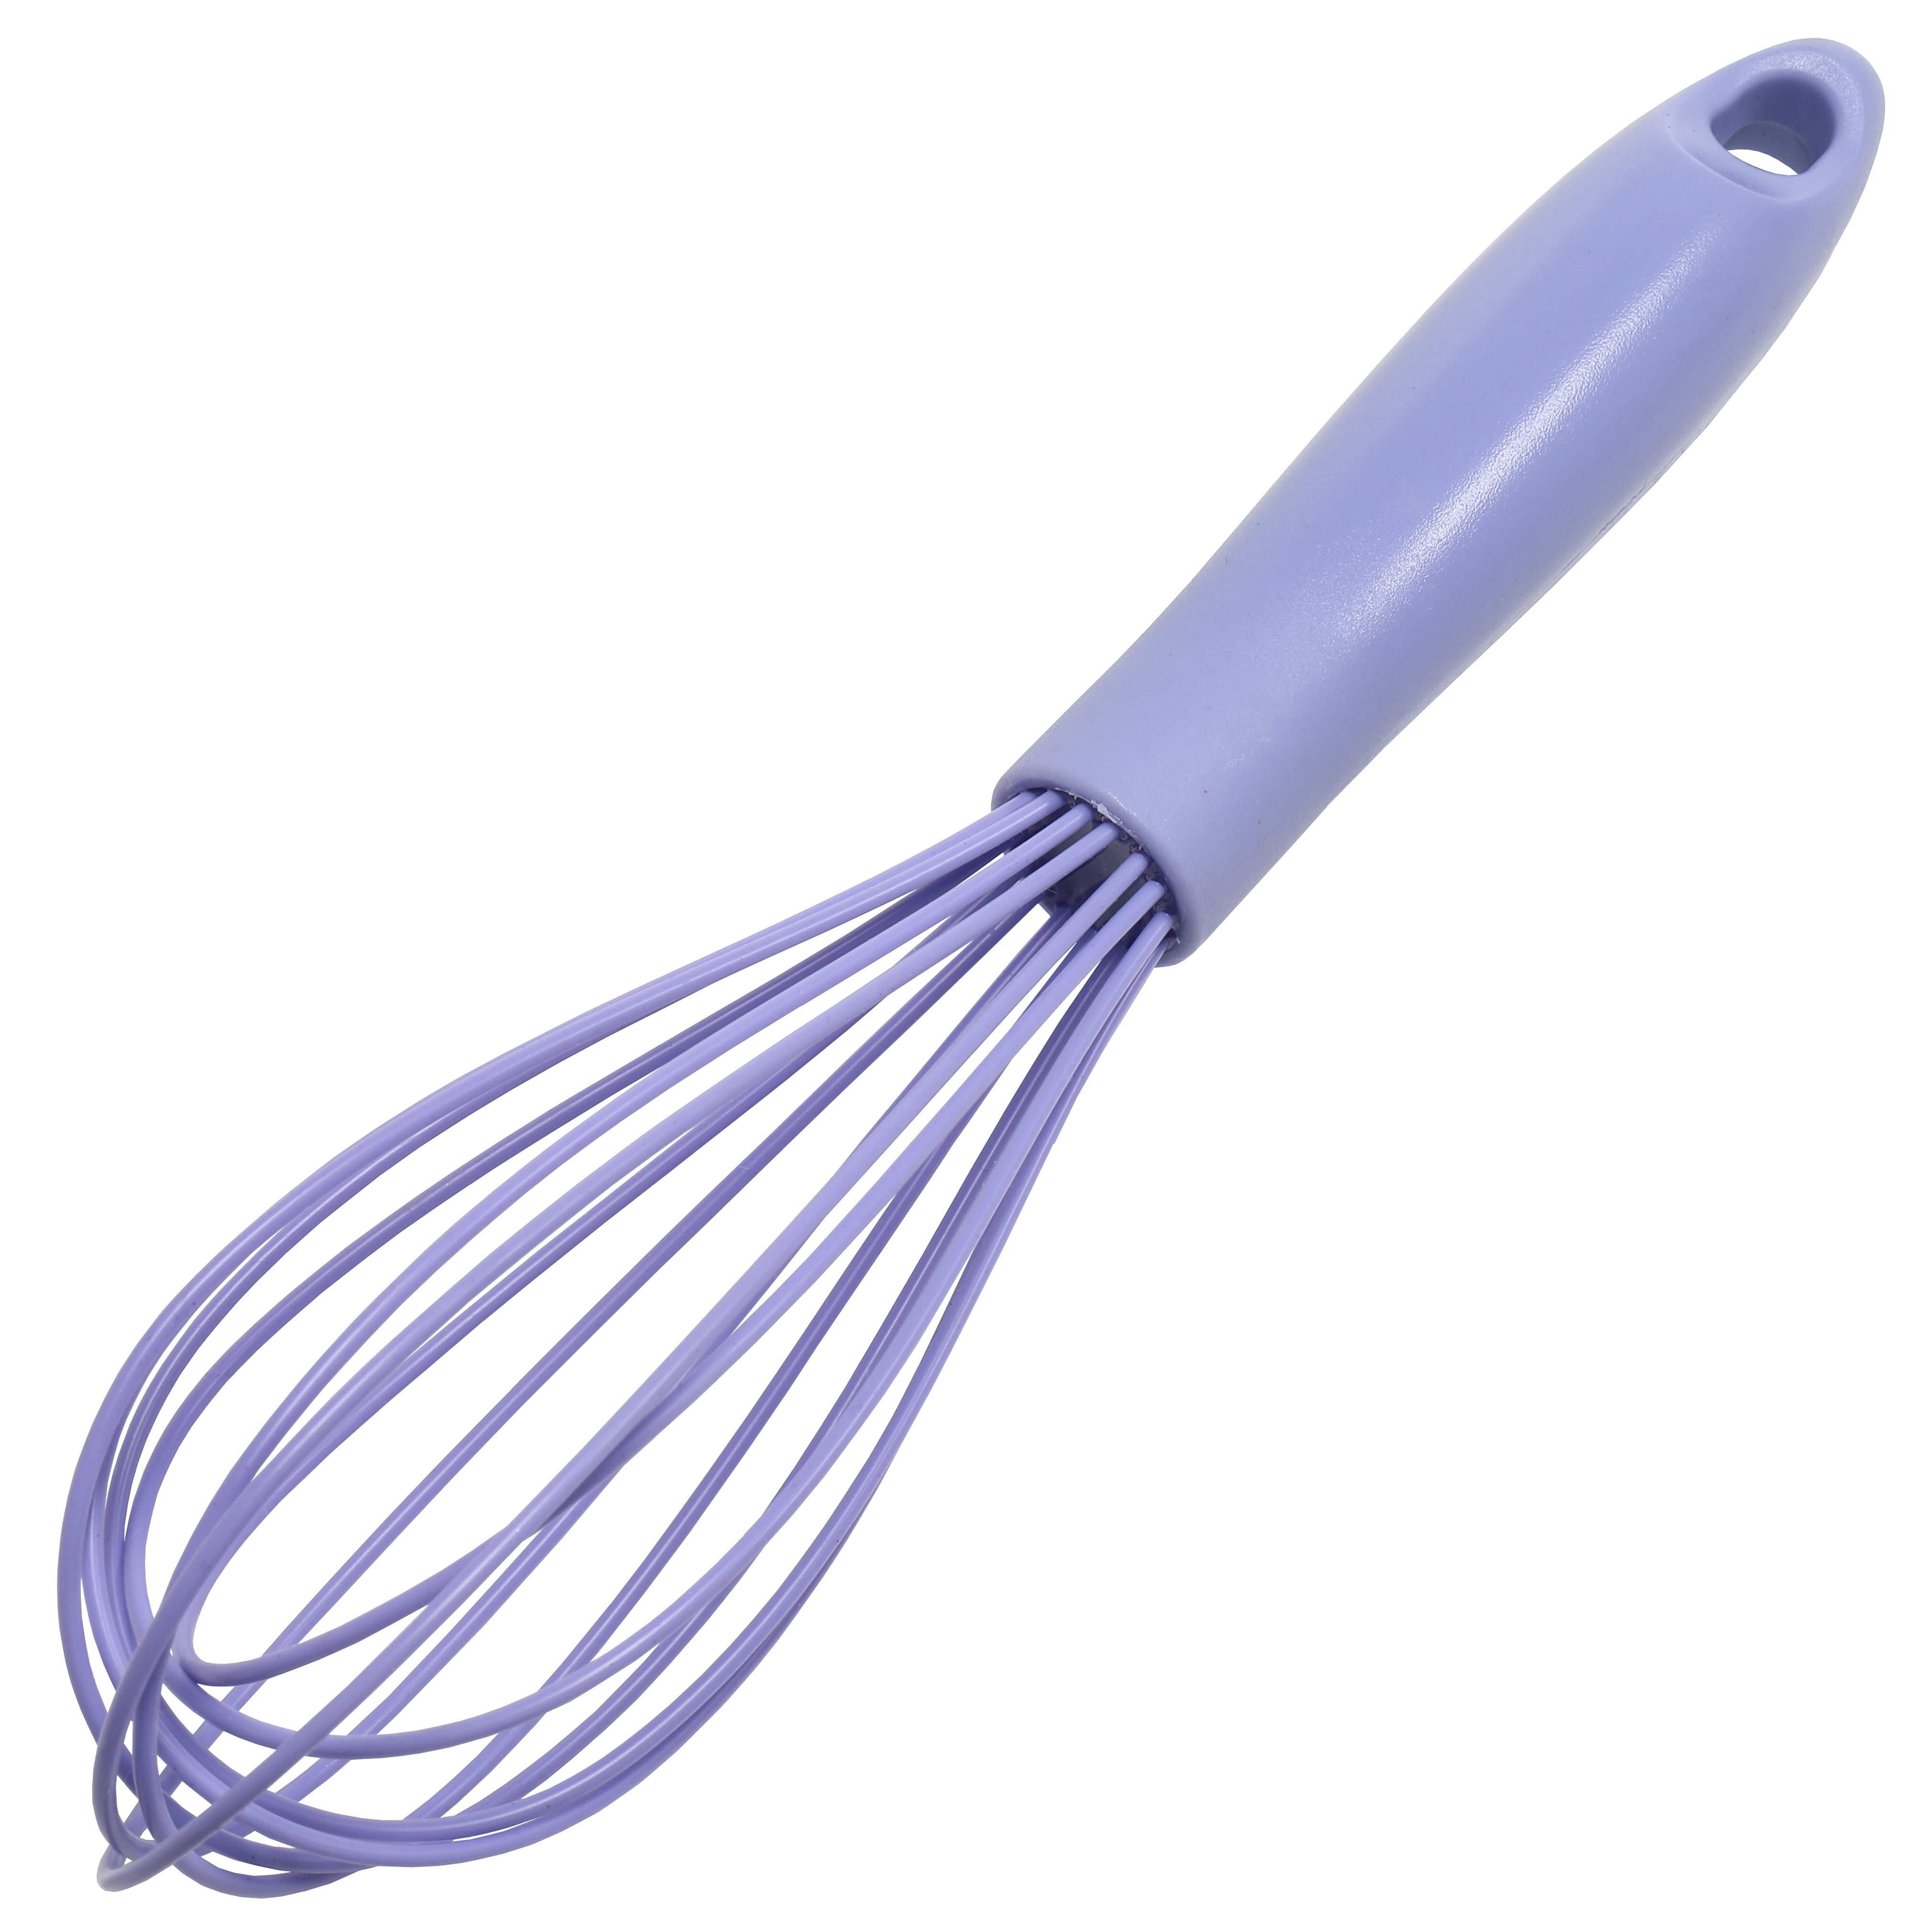 PRIAVERA Stainless Steel Deluxe Whisk | blueoco